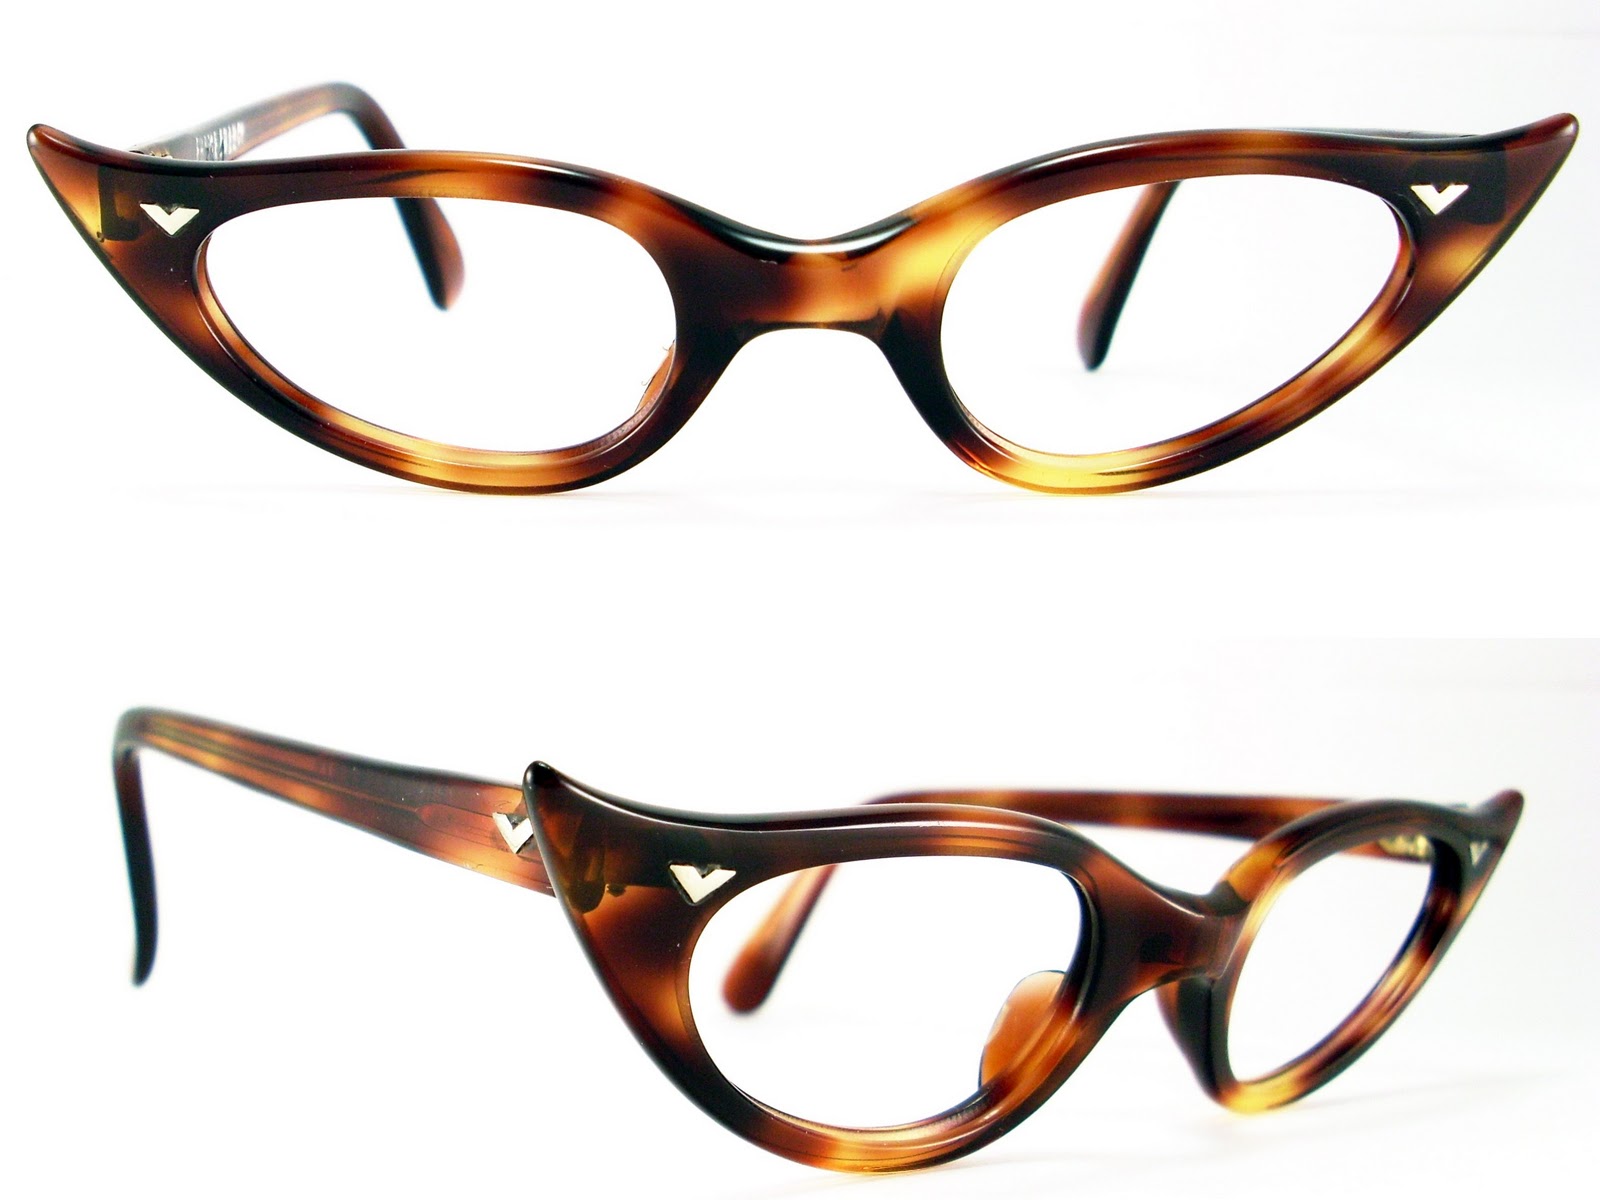 7. "The Best Eyeglass Frames for Blonde Hair: From Round to Cat Eye" - wide 1